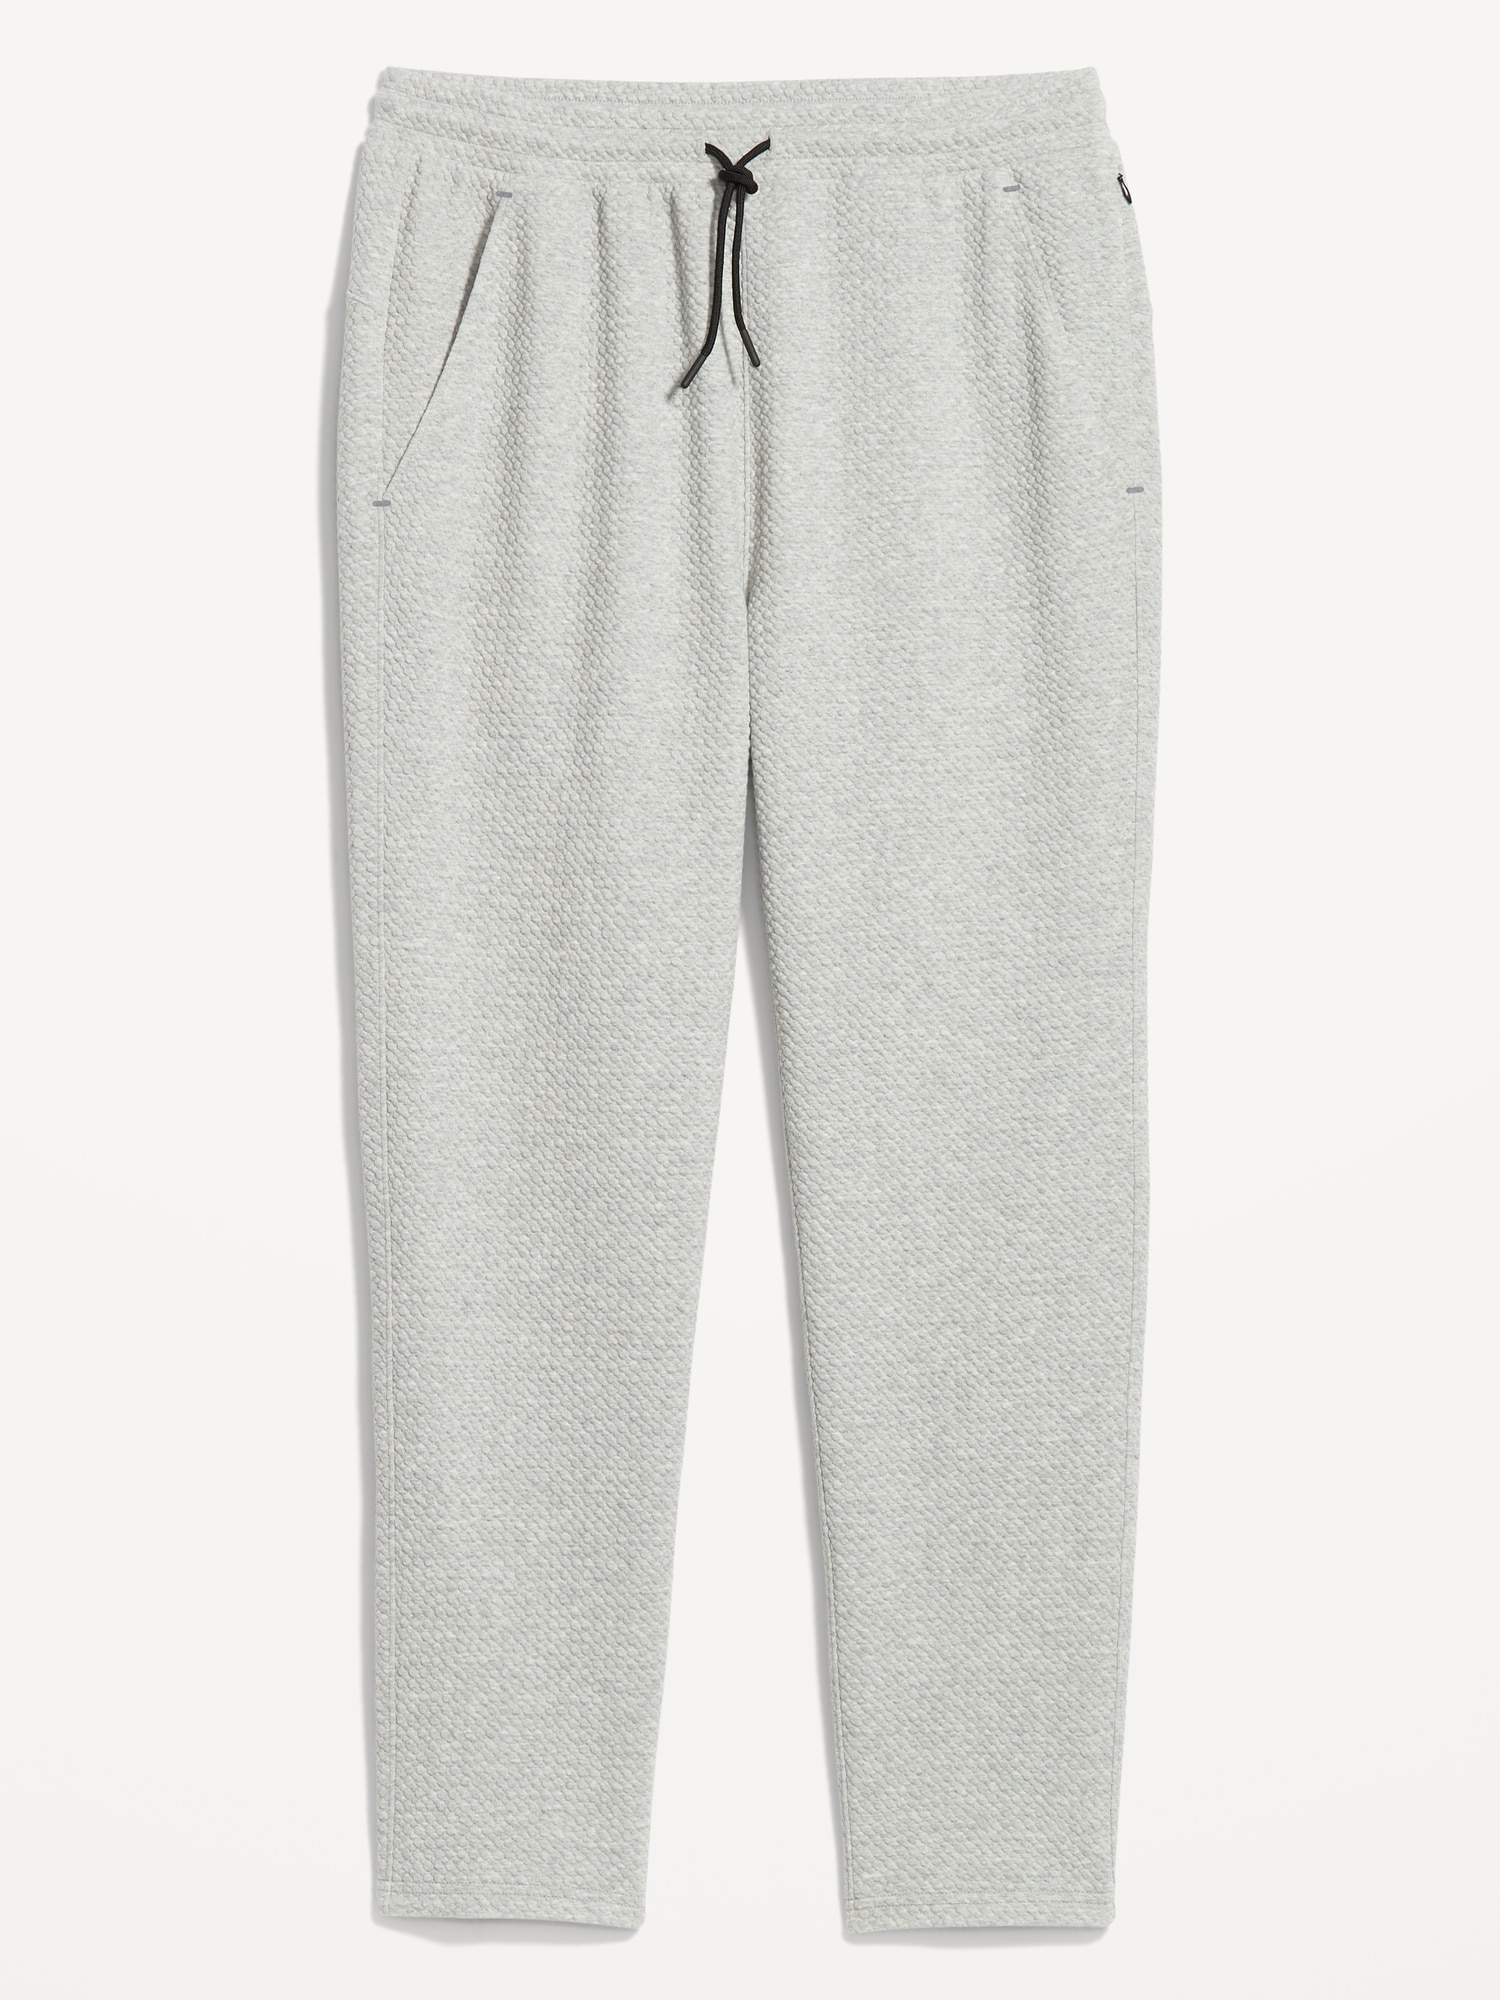 Textured Dynamic Fleece Tapered Sweatpants